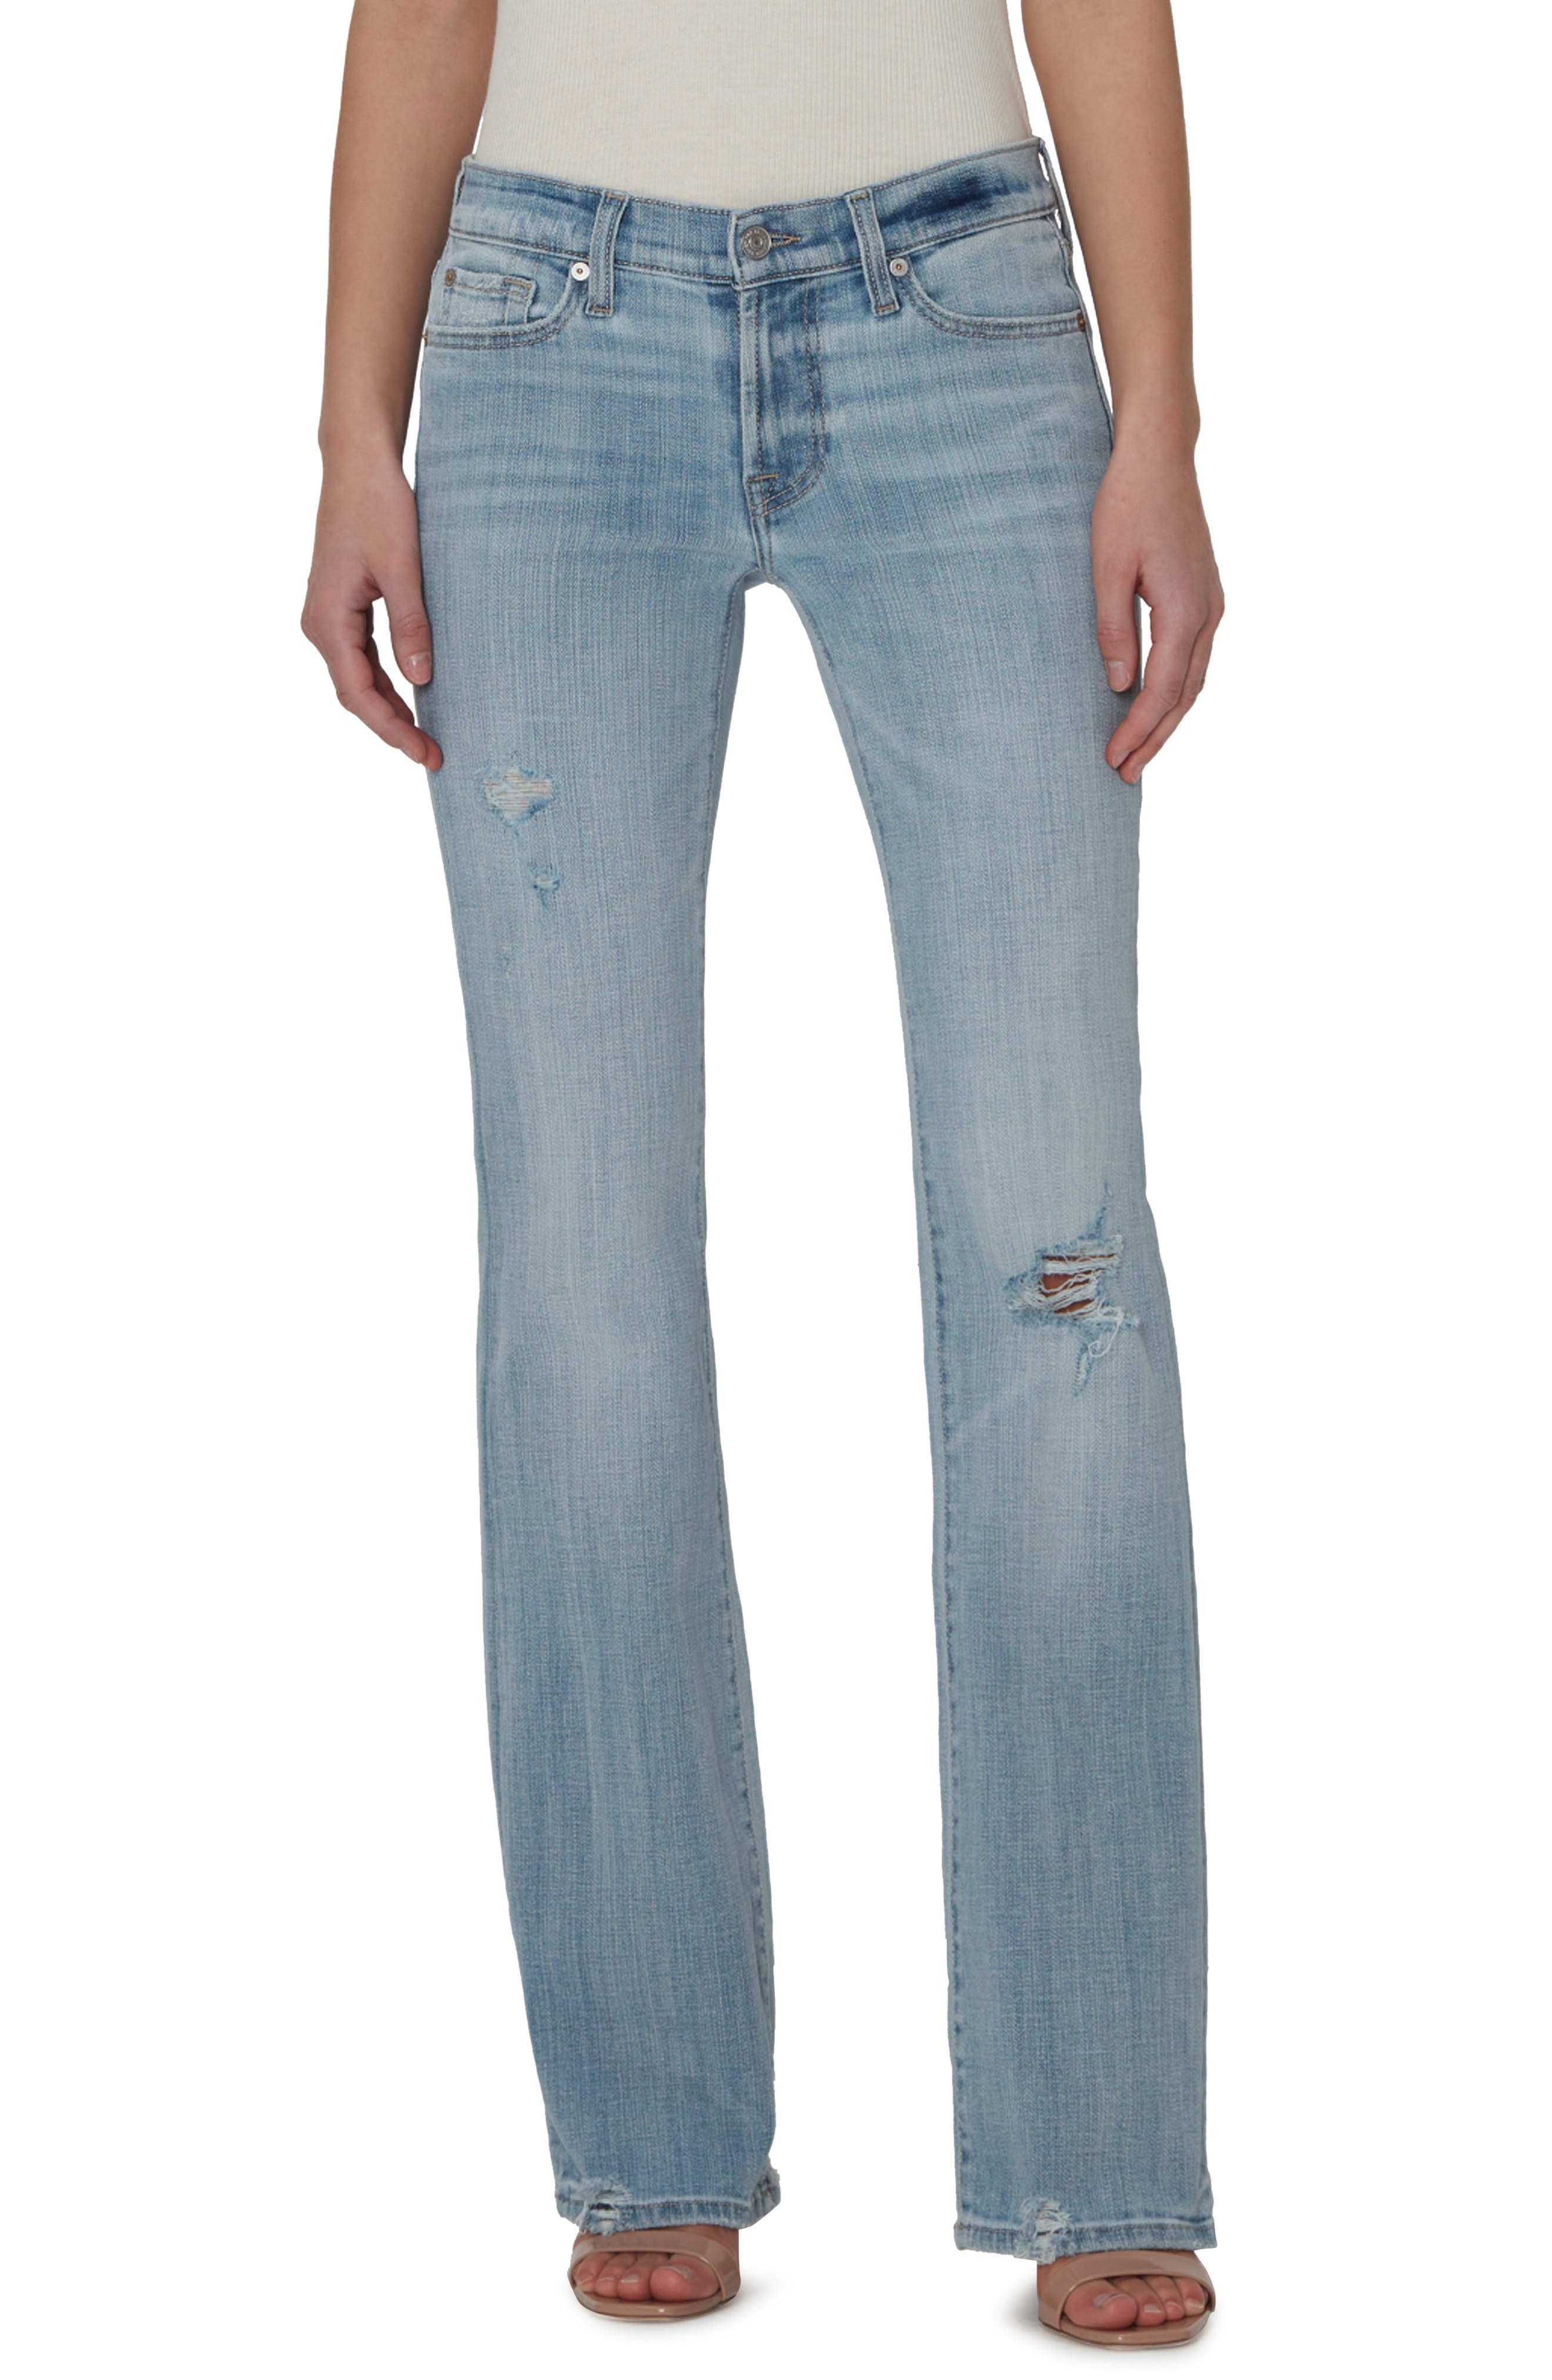 7 For All Mankind Denim Bootcut Jeans Bootcut Tailorless in Blau Damen Bekleidung Jeans Bootcut Jeans 